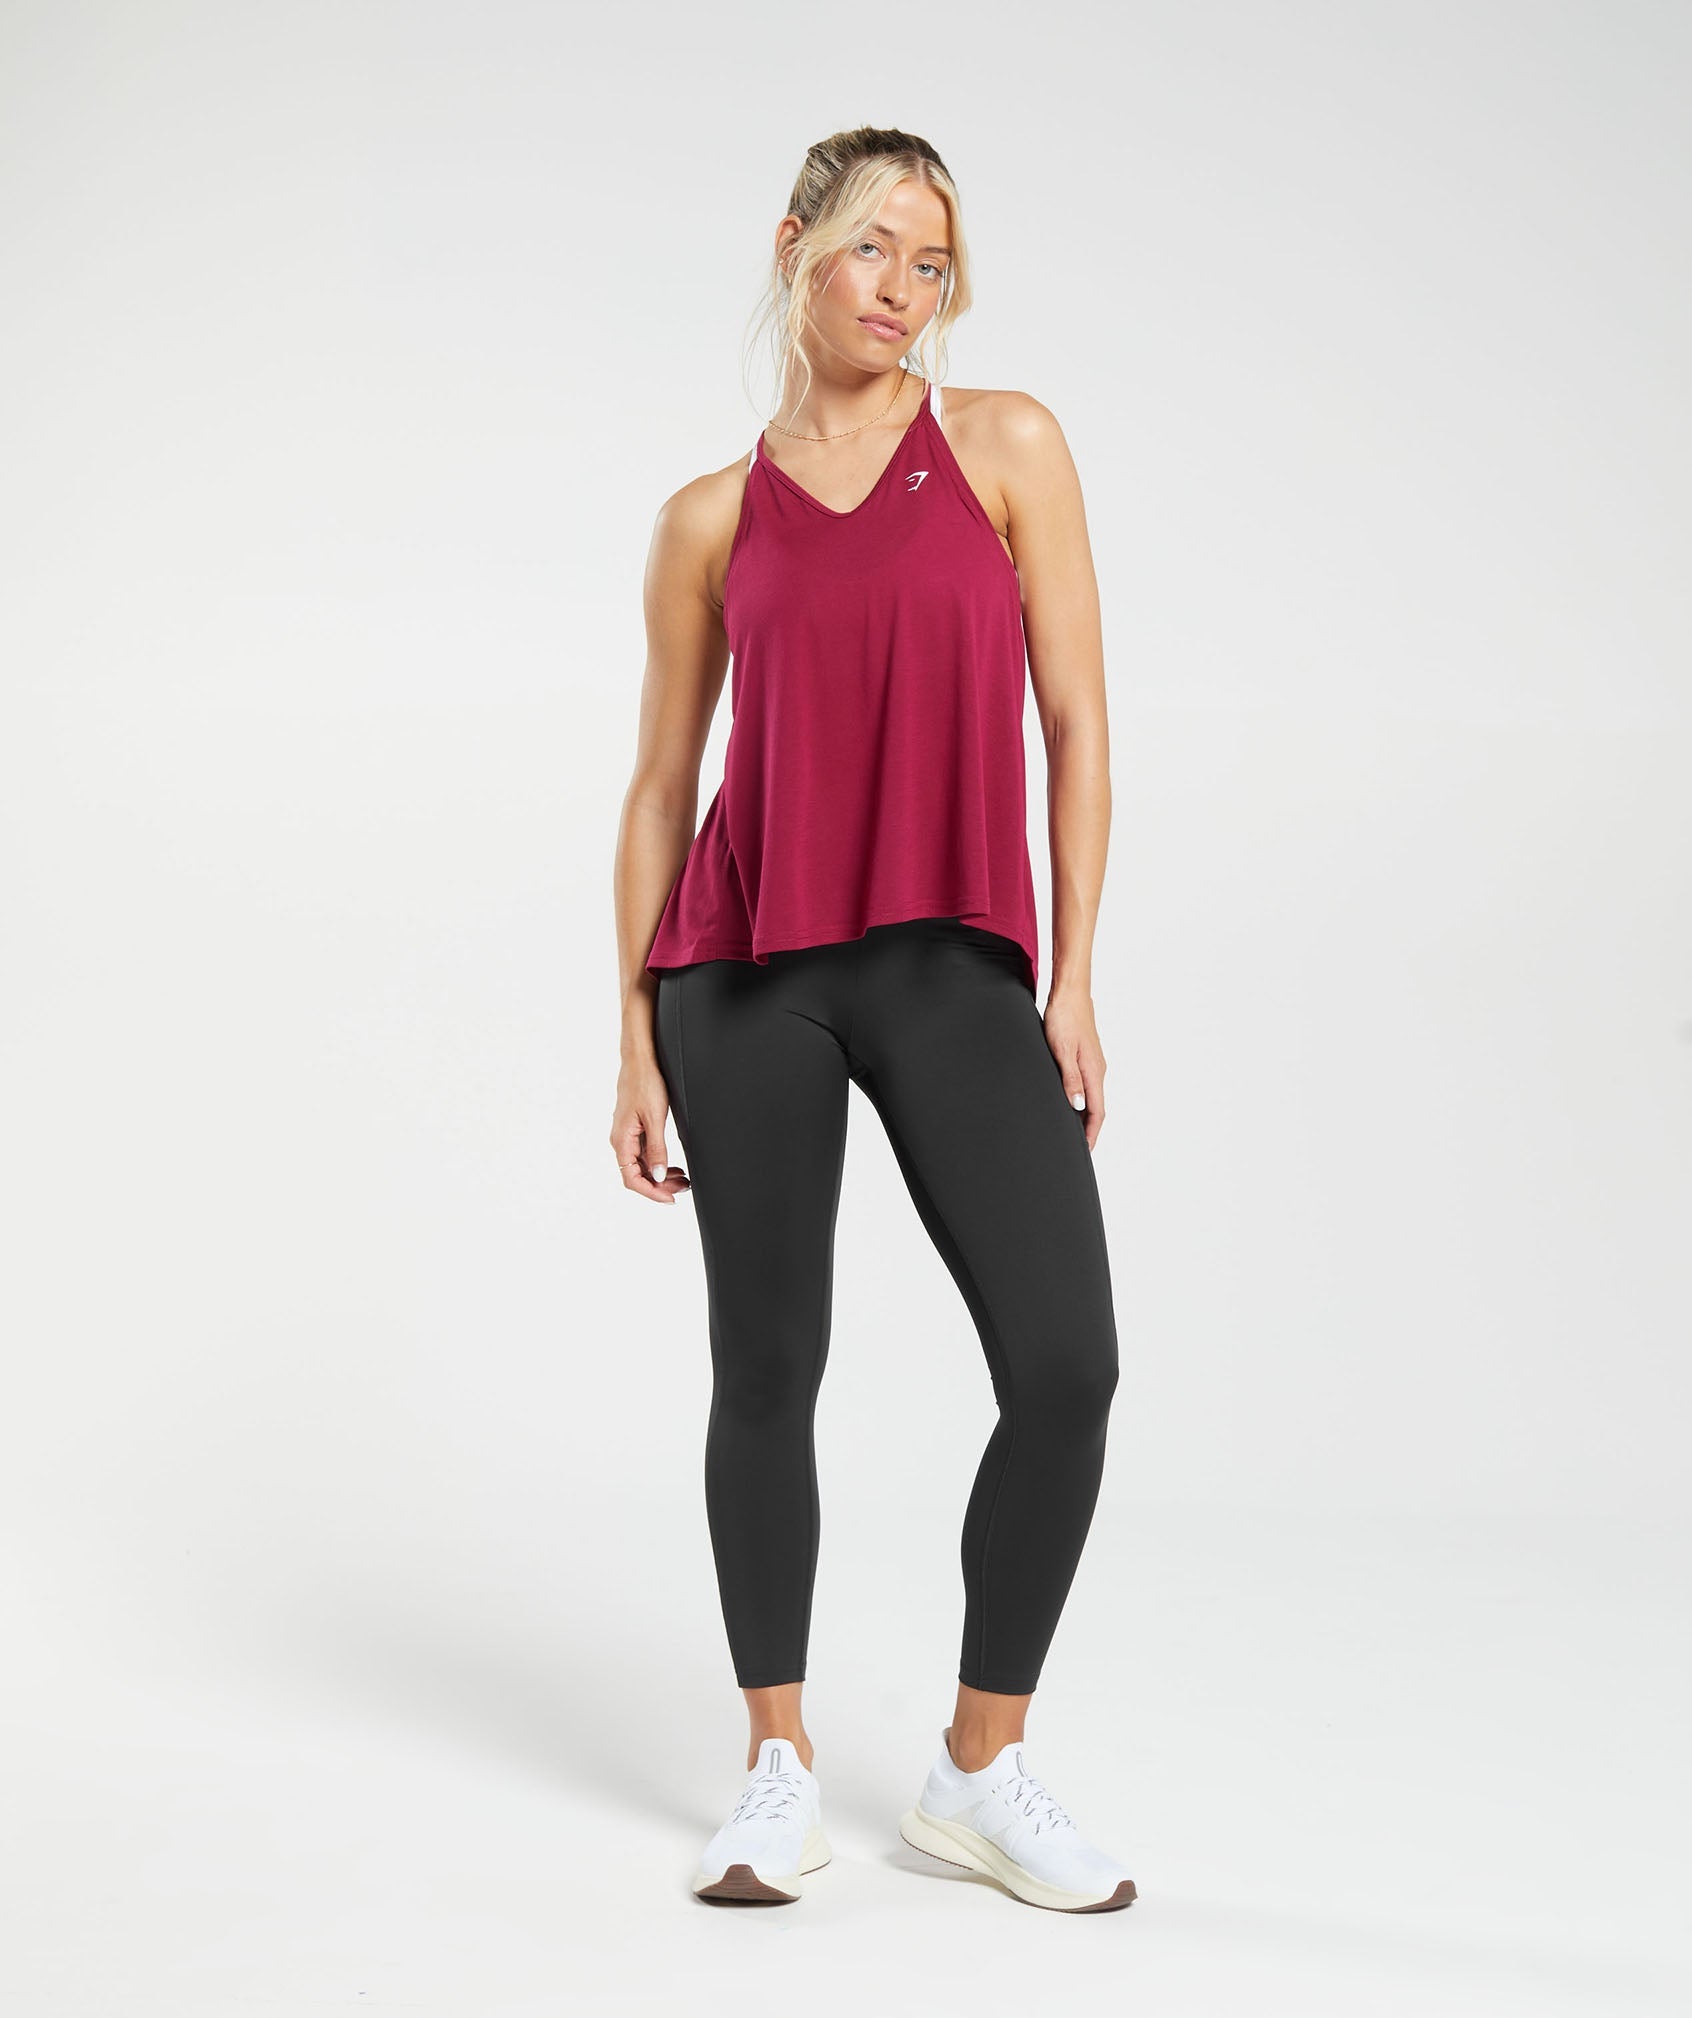 Super Soft Tank in Raspberry Pink - view 4